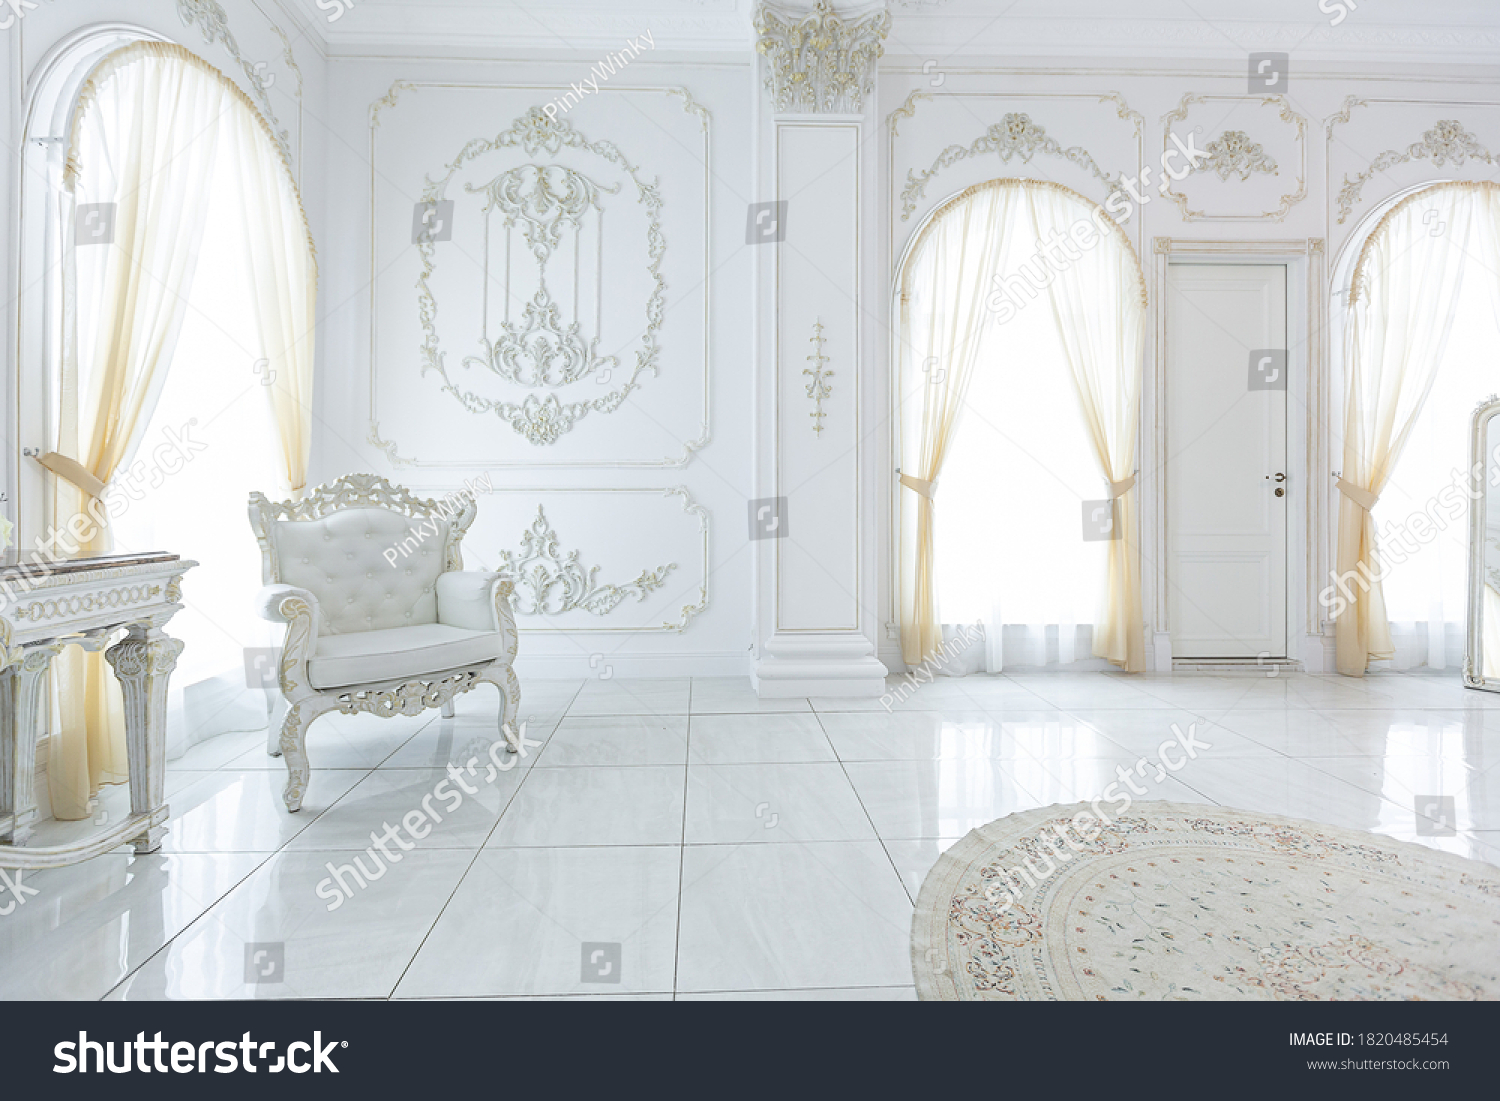 luxury royal posh interior in baroque style. very bright, light and white hall with expensive oldstyle furniture. large windows and stucco ornament decorations on the walls #1820485454